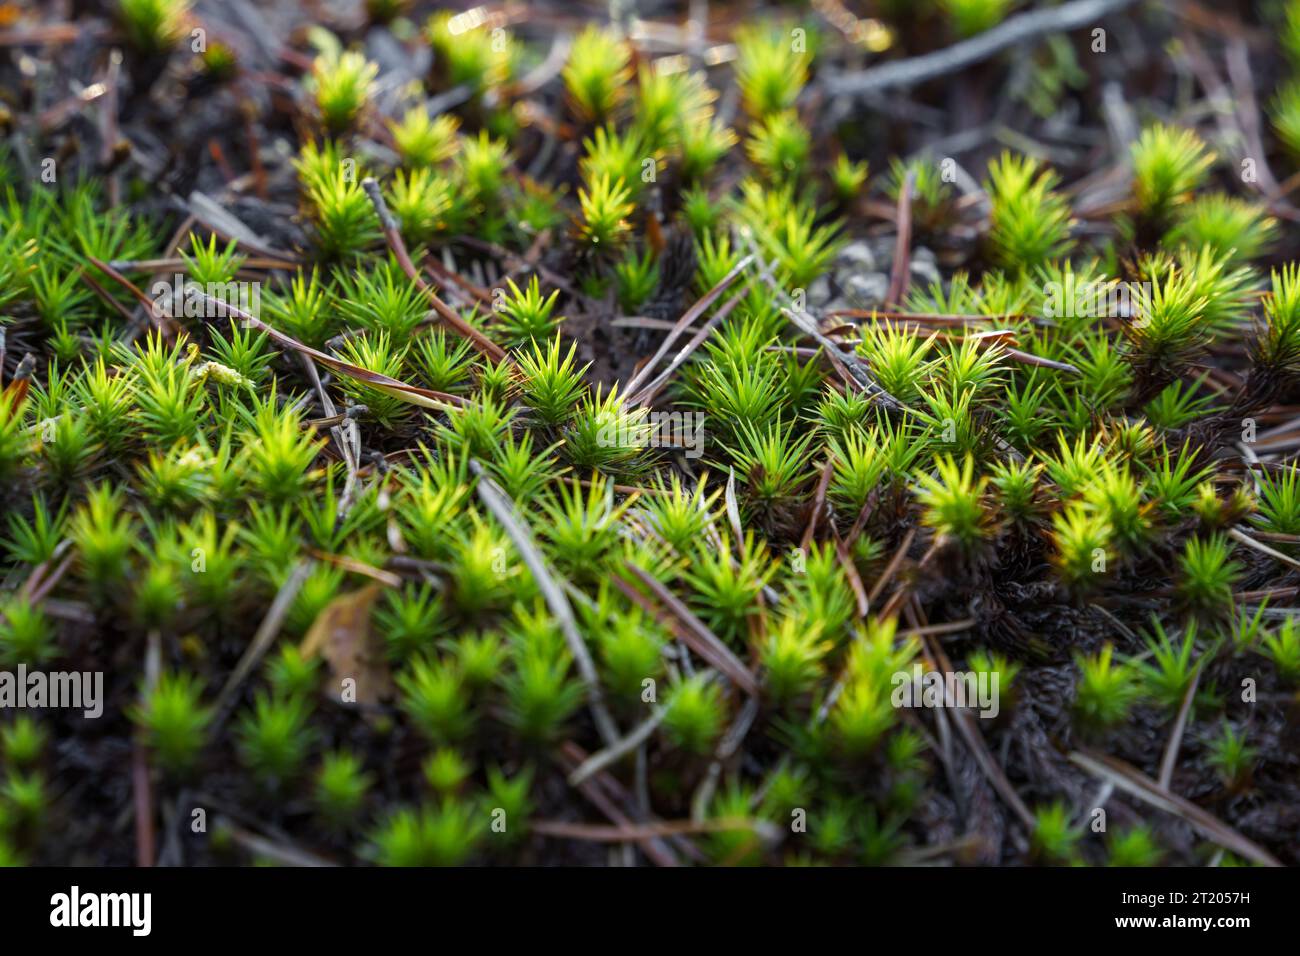 Haircap moss or hair moss (Polytrichum) close up in nature with pine needles Stock Photo